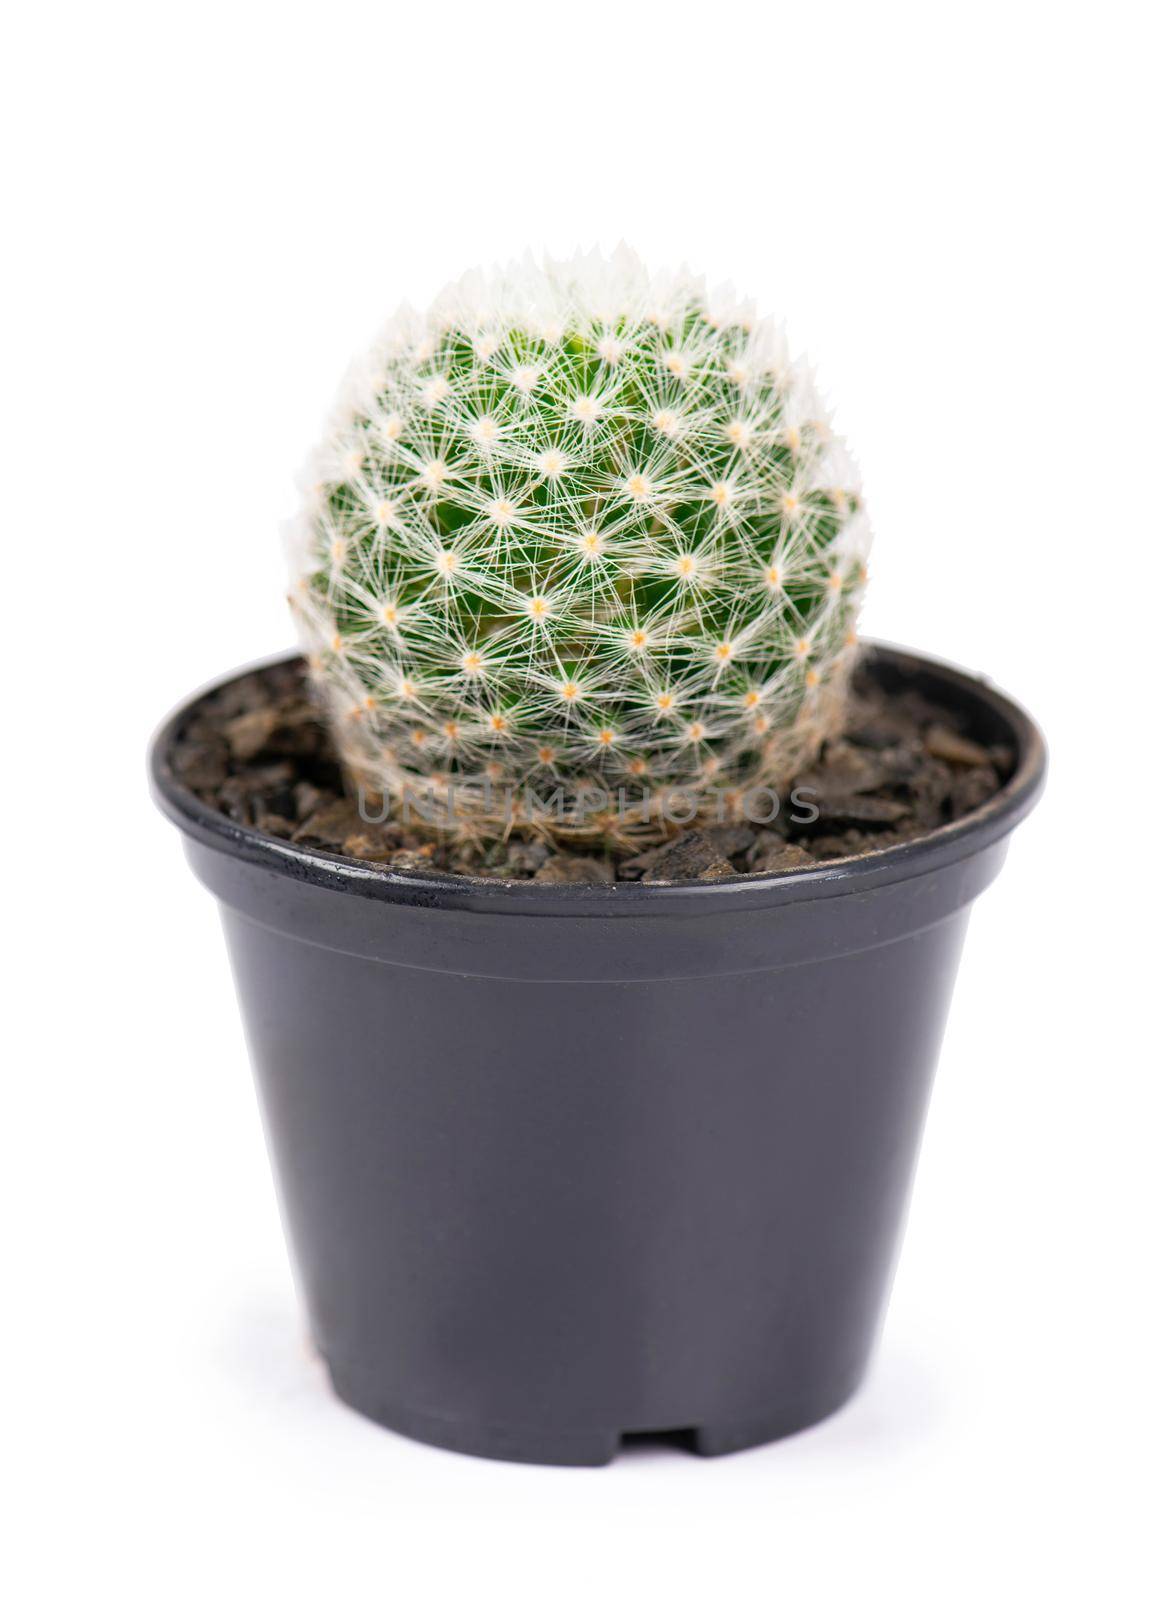 close up of small cactus houseplant in pot by aprilphoto